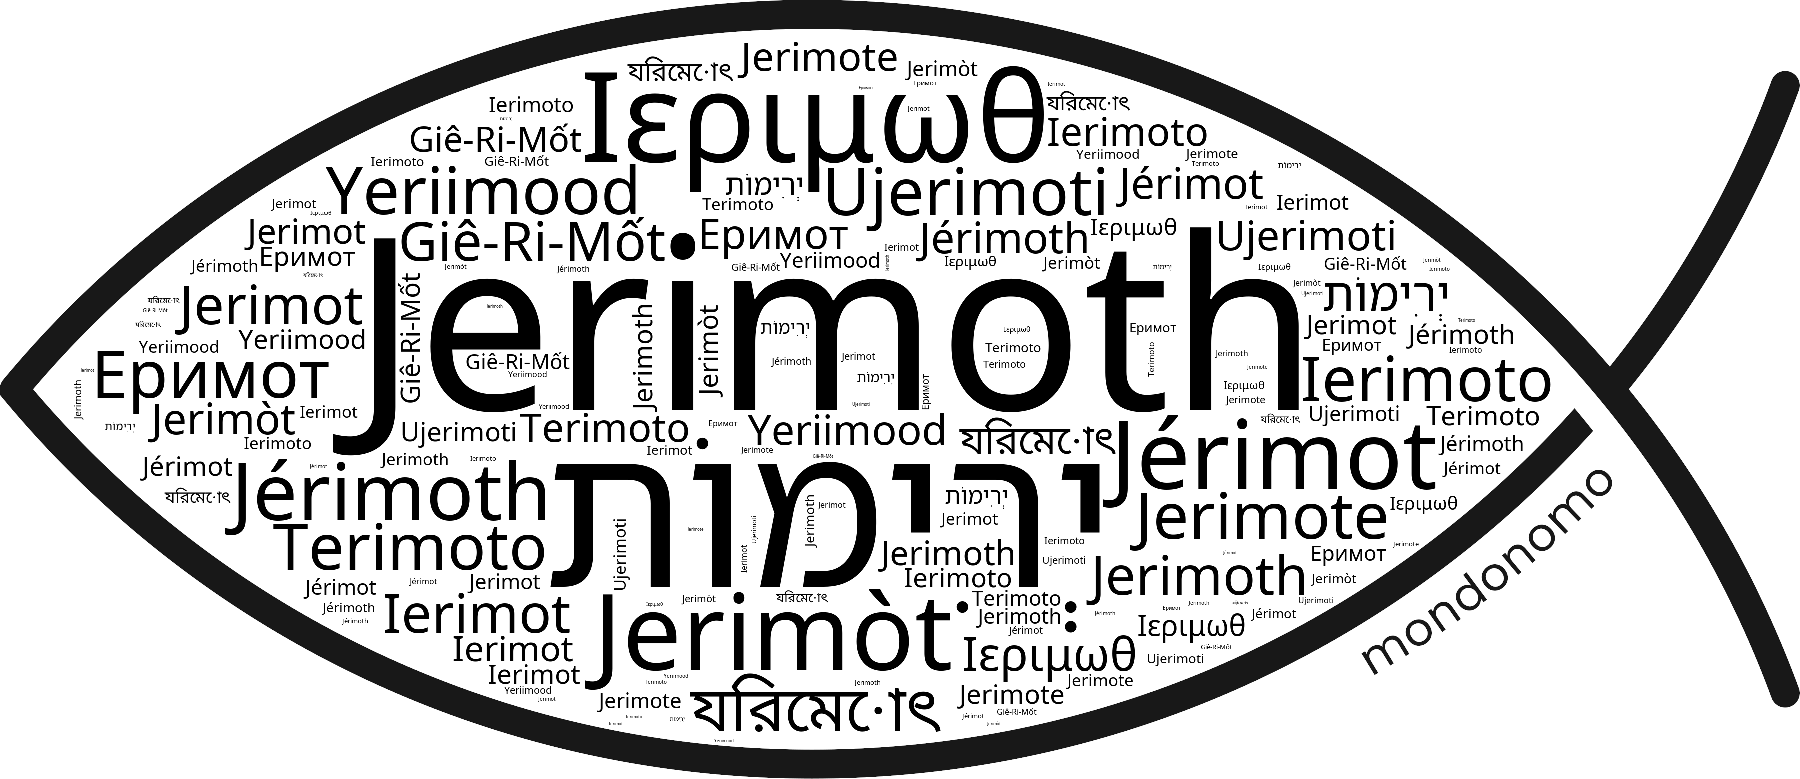 Name Jerimoth in the world's Bibles